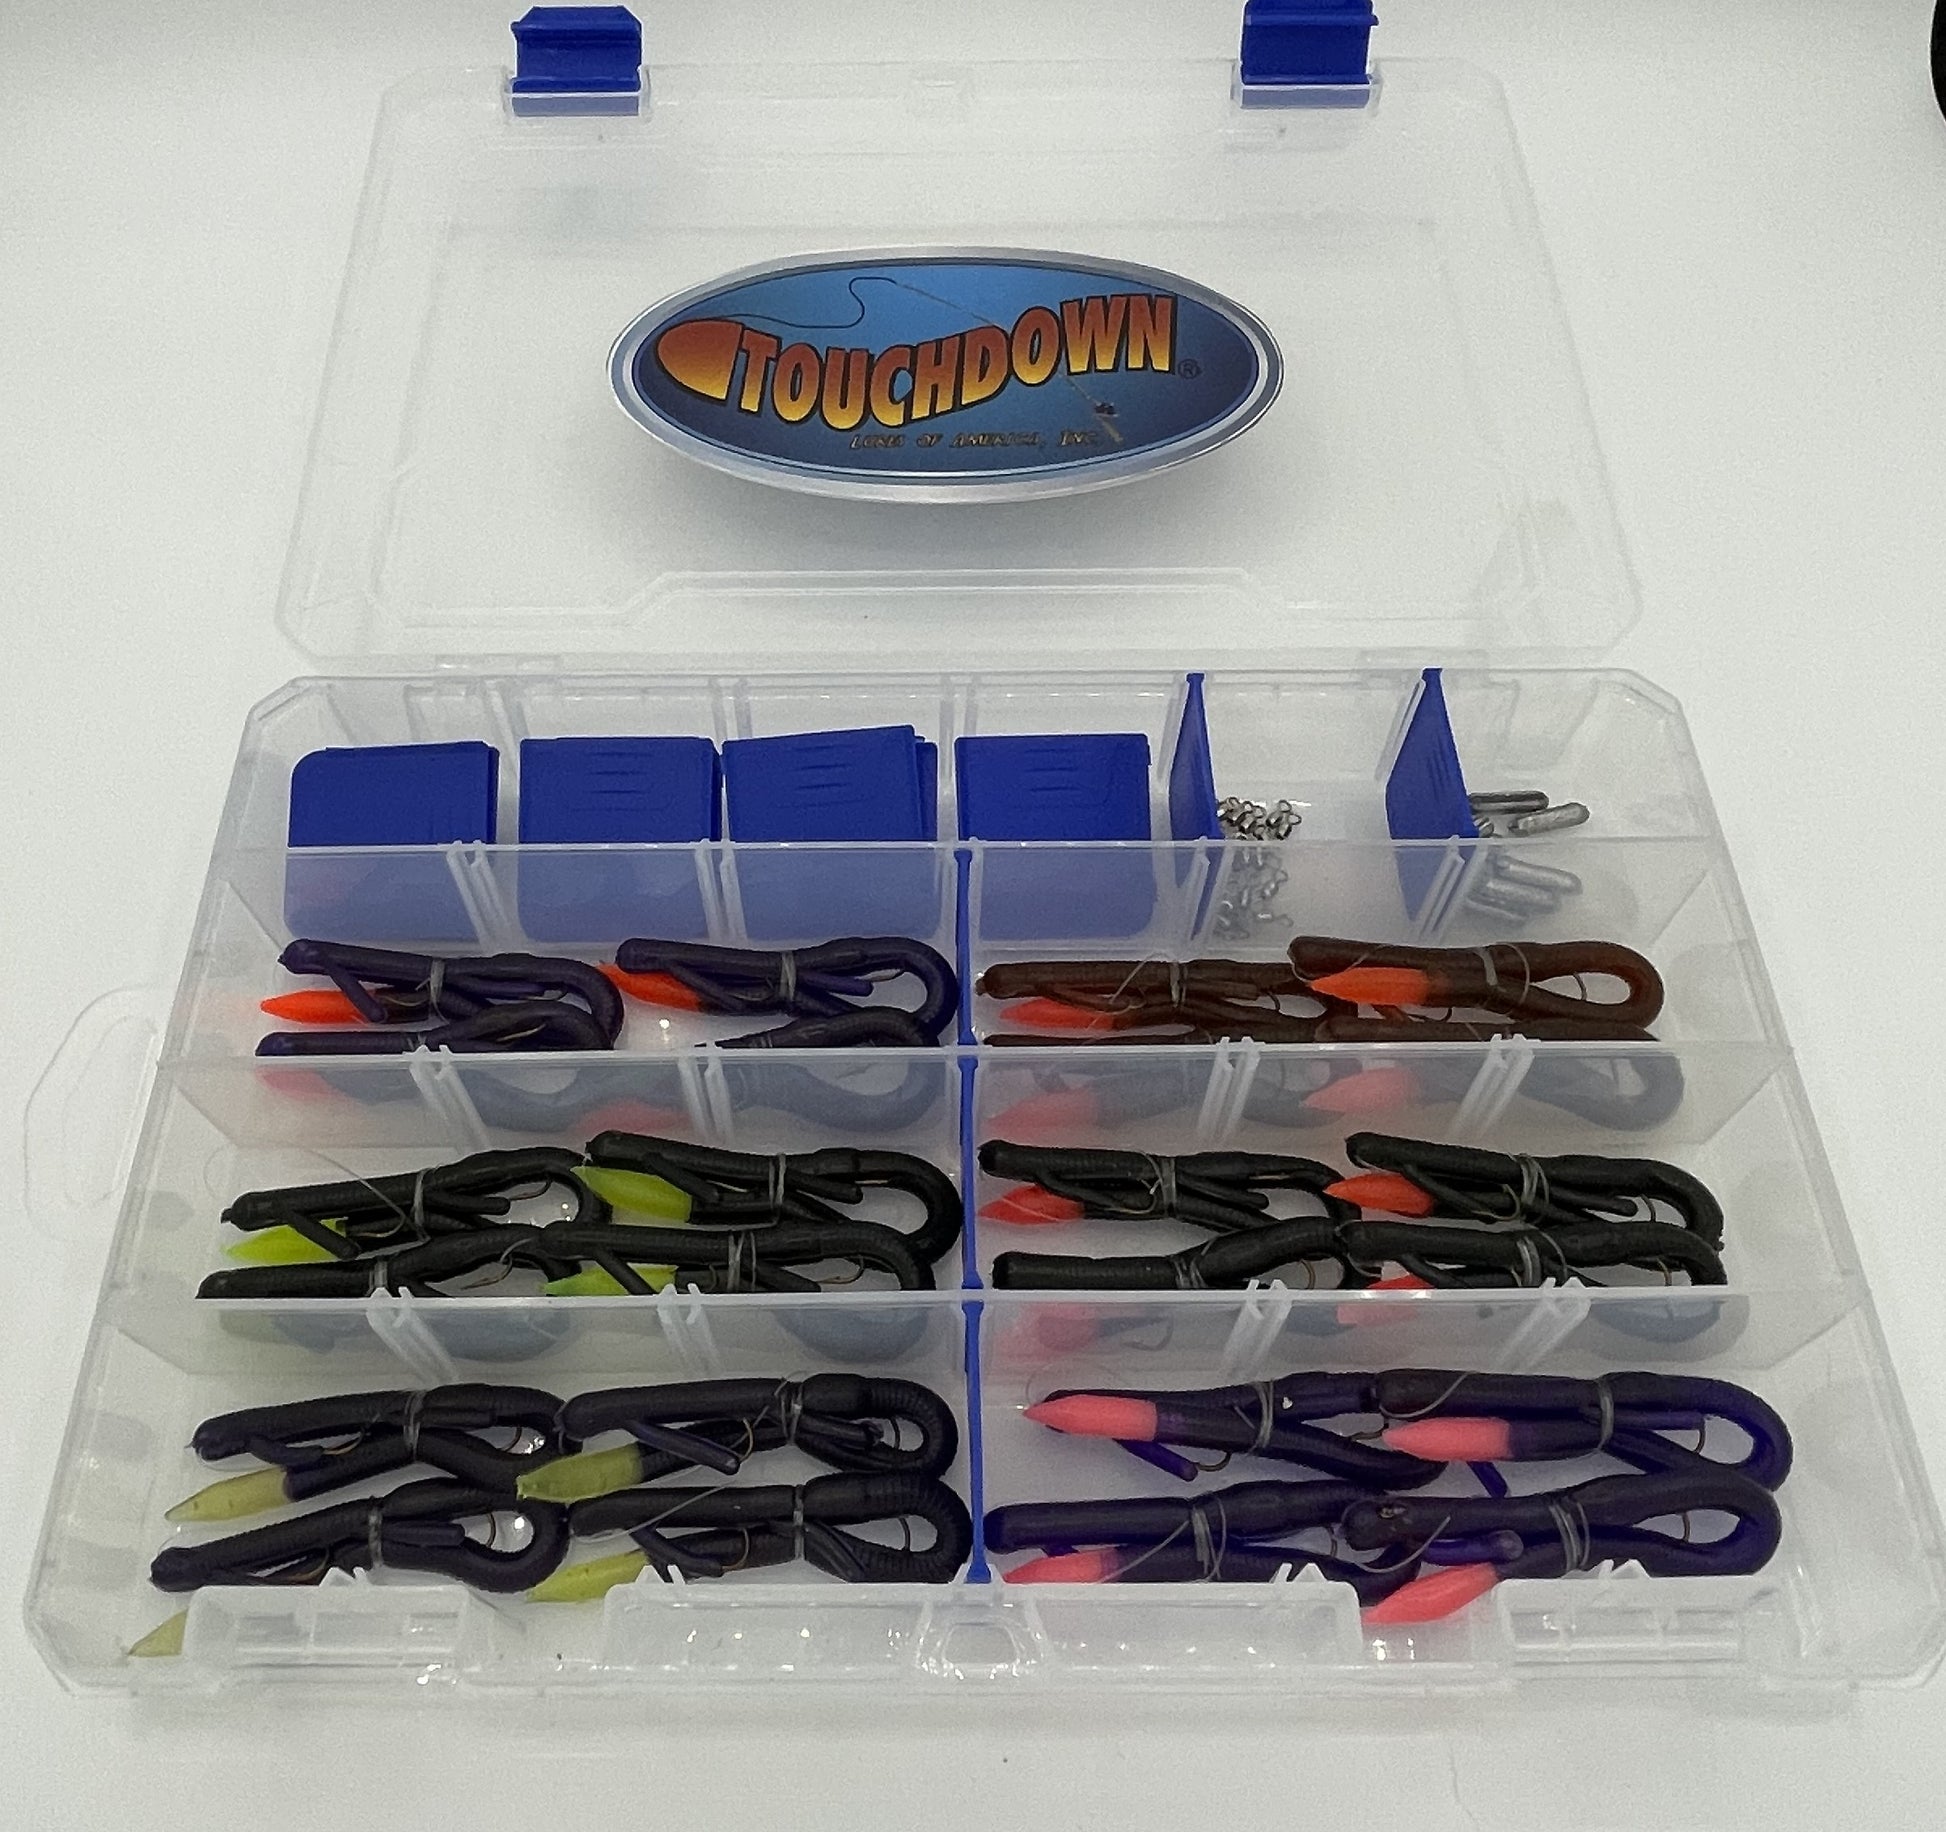 Tackle Pack Series 4 Original 6 Worm Firetails – Touchdown Fishing Lures